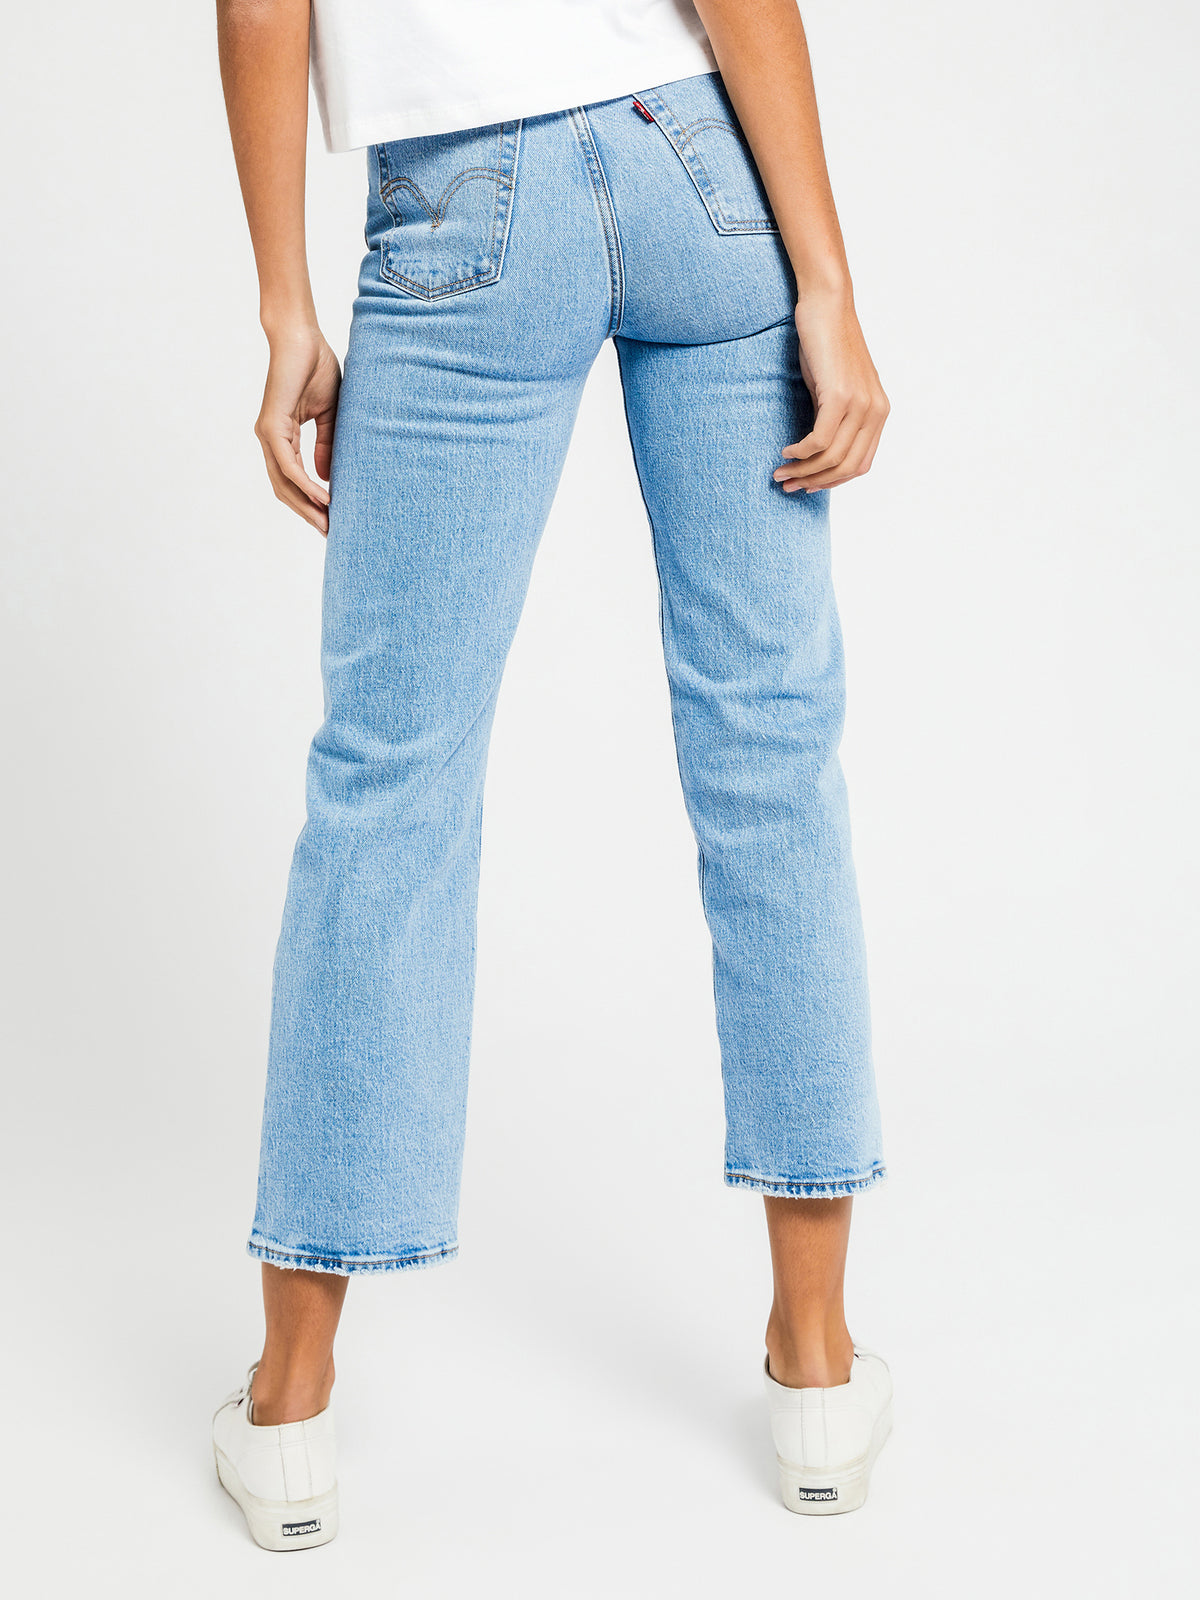 Ribcage Straight Ankle Jeans in Tango Fade Blue Denim